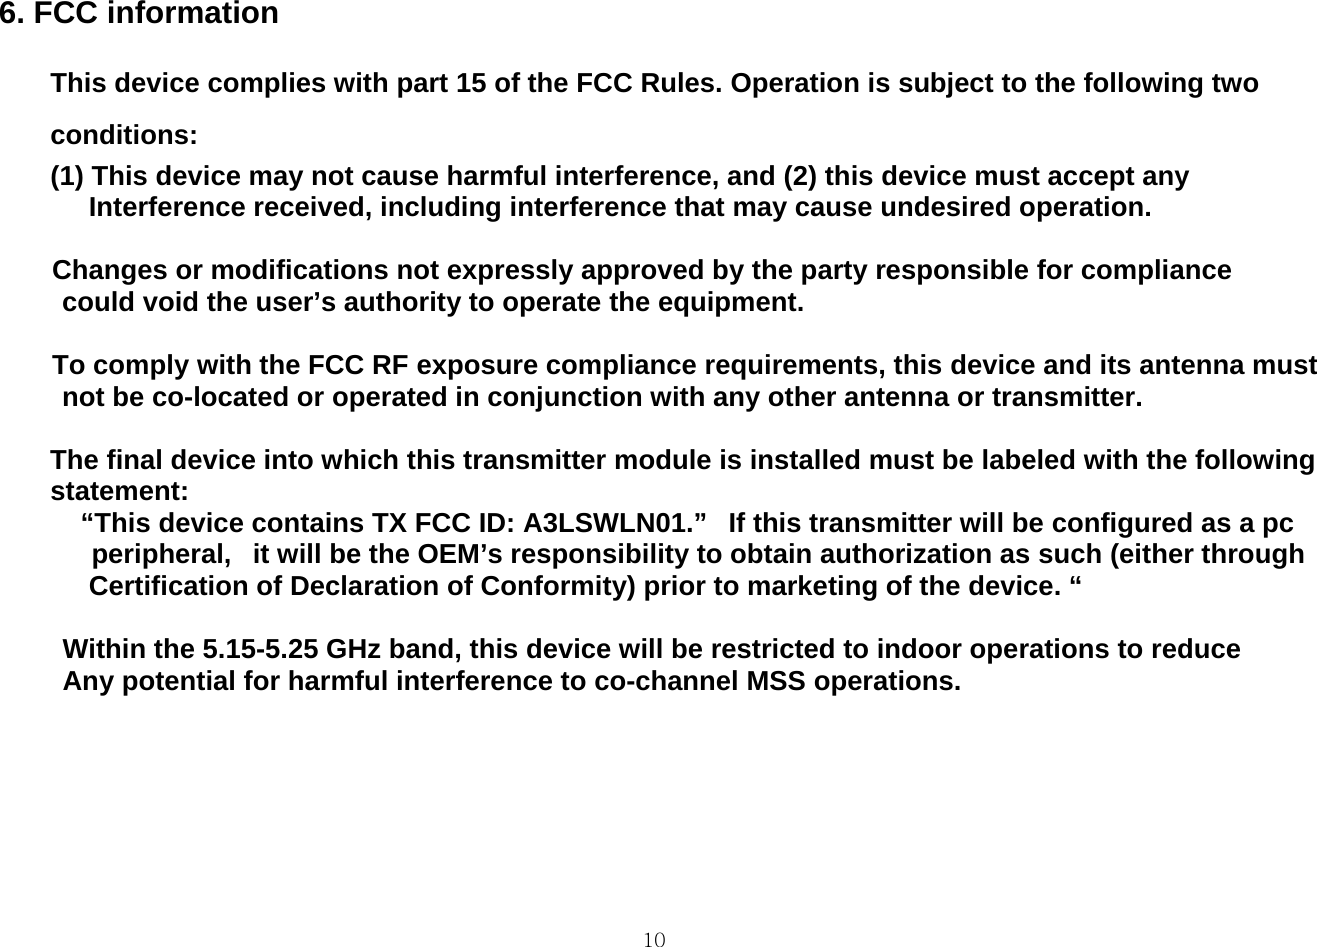  106. FCC information    This device complies with part 15 of the FCC Rules. Operation is subject to the following two conditions:  (1) This device may not cause harmful interference, and (2) this device must accept any Interference received, including interference that may cause undesired operation.                  Changes or modifications not expressly approved by the party responsible for compliance   could void the user’s authority to operate the equipment.                  To comply with the FCC RF exposure compliance requirements, this device and its antenna must   not be co-located or operated in conjunction with any other antenna or transmitter.                      The final device into which this transmitter module is installed must be labeled with the following   statement:                 “This device contains TX FCC ID: A3LSWLN01.”   If this transmitter will be configured as a pc peripheral,   it will be the OEM’s responsibility to obtain authorization as such (either through Certification of Declaration of Conformity) prior to marketing of the device. “         Within the 5.15-5.25 GHz band, this device will be restricted to indoor operations to reduce        Any potential for harmful interference to co-channel MSS operations. 